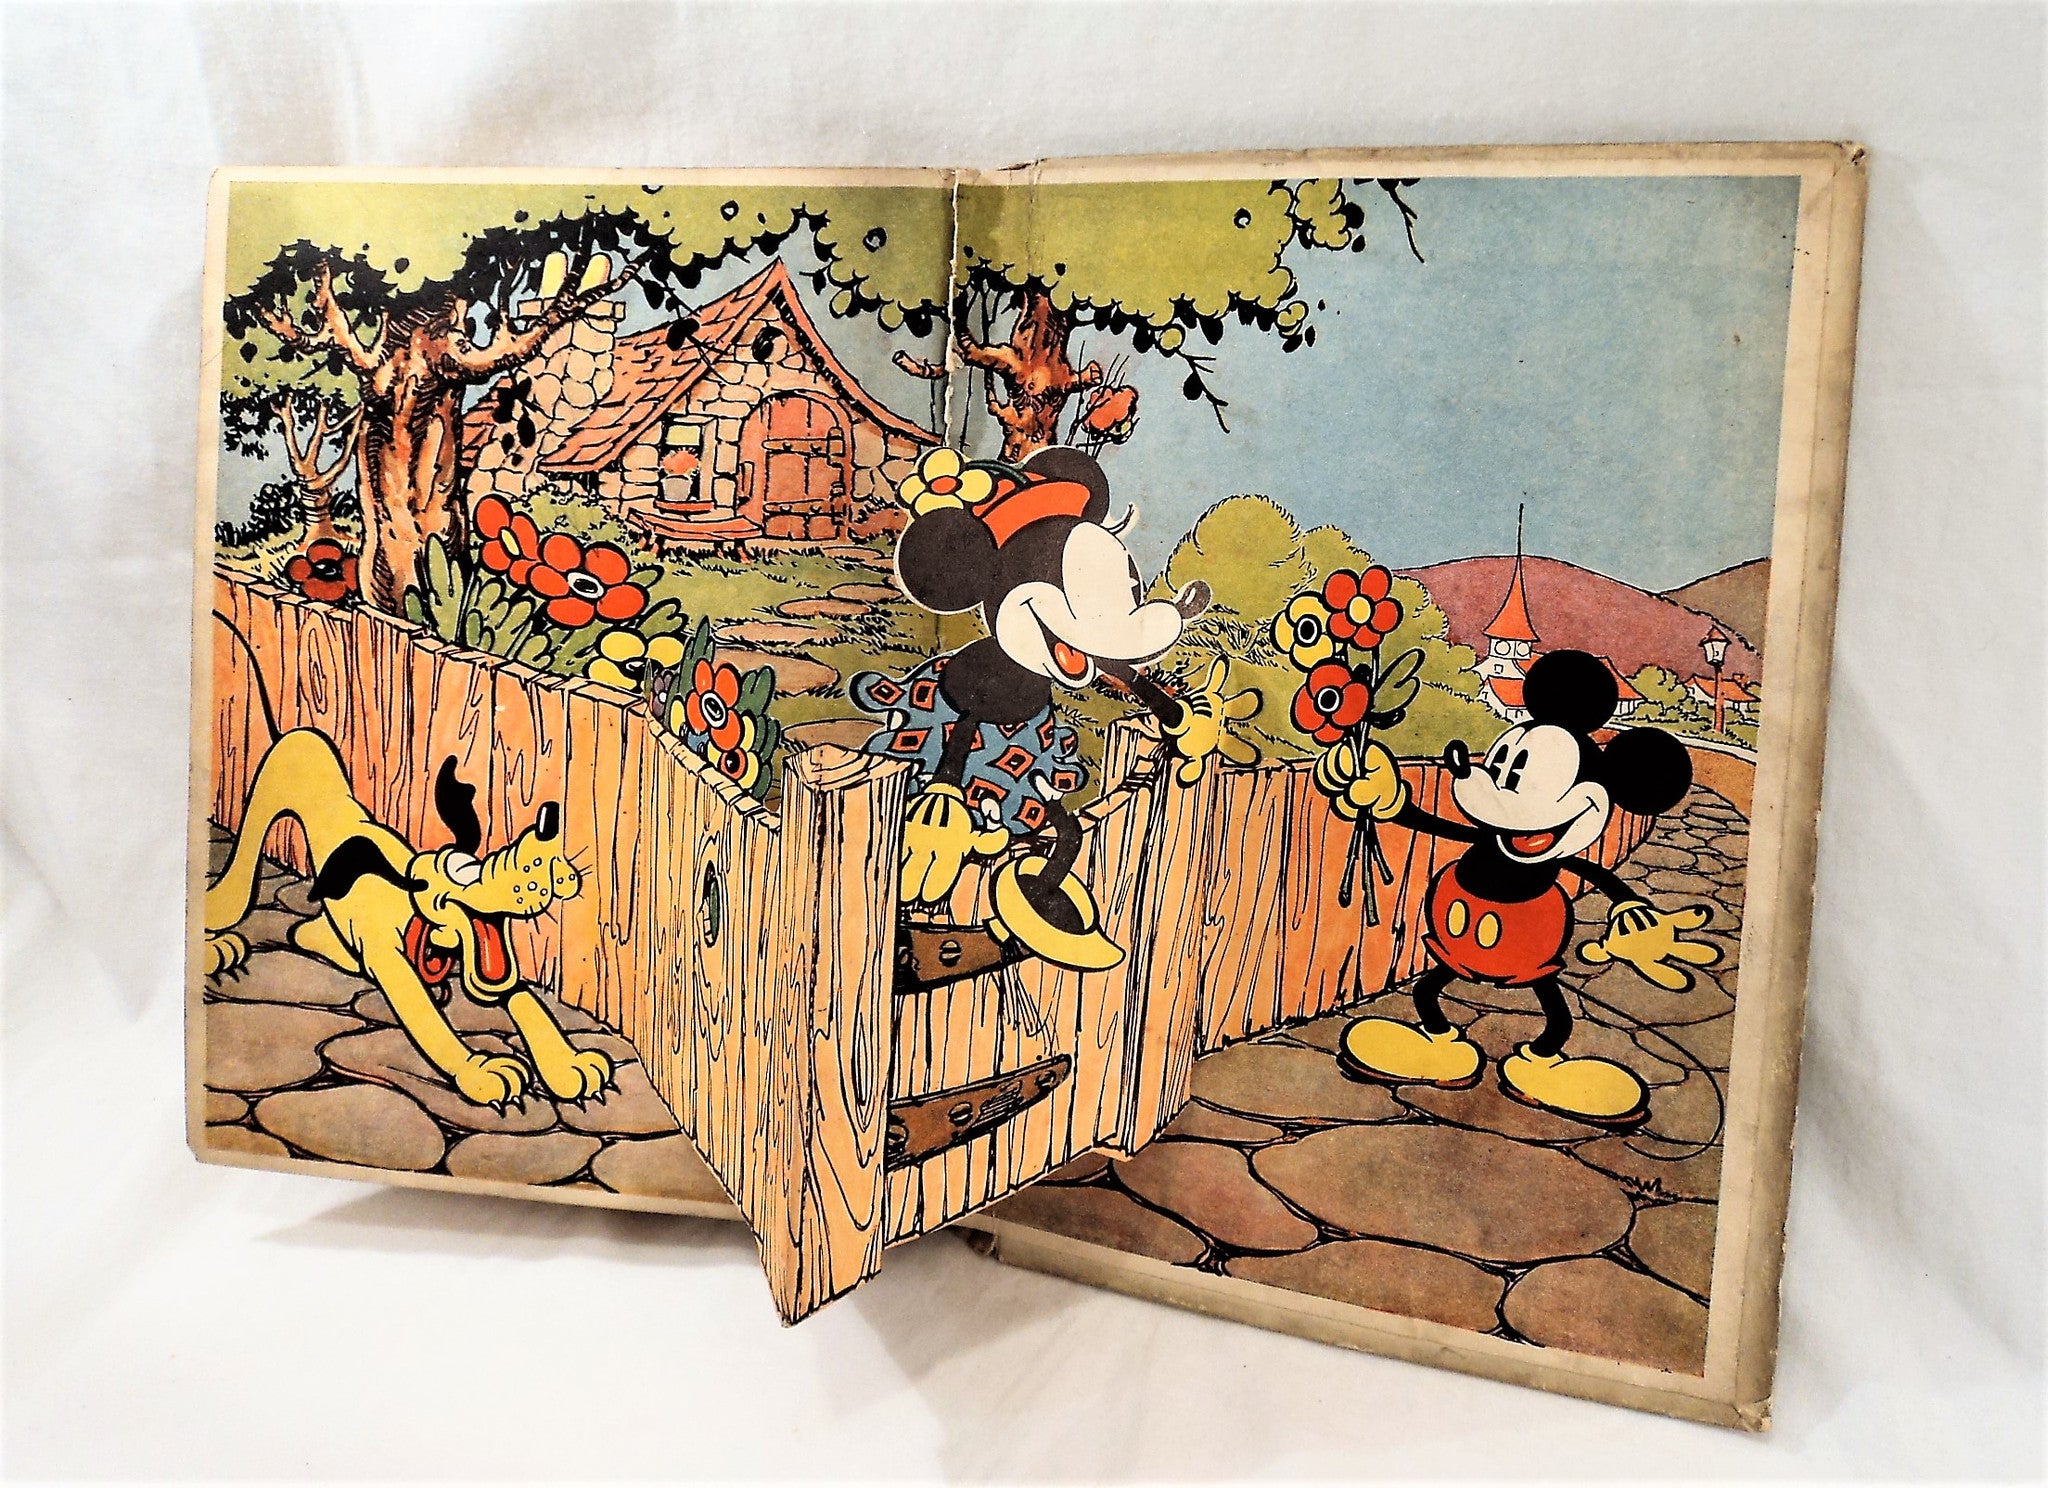 1933 The Pop-Up Minnie Mouse Book